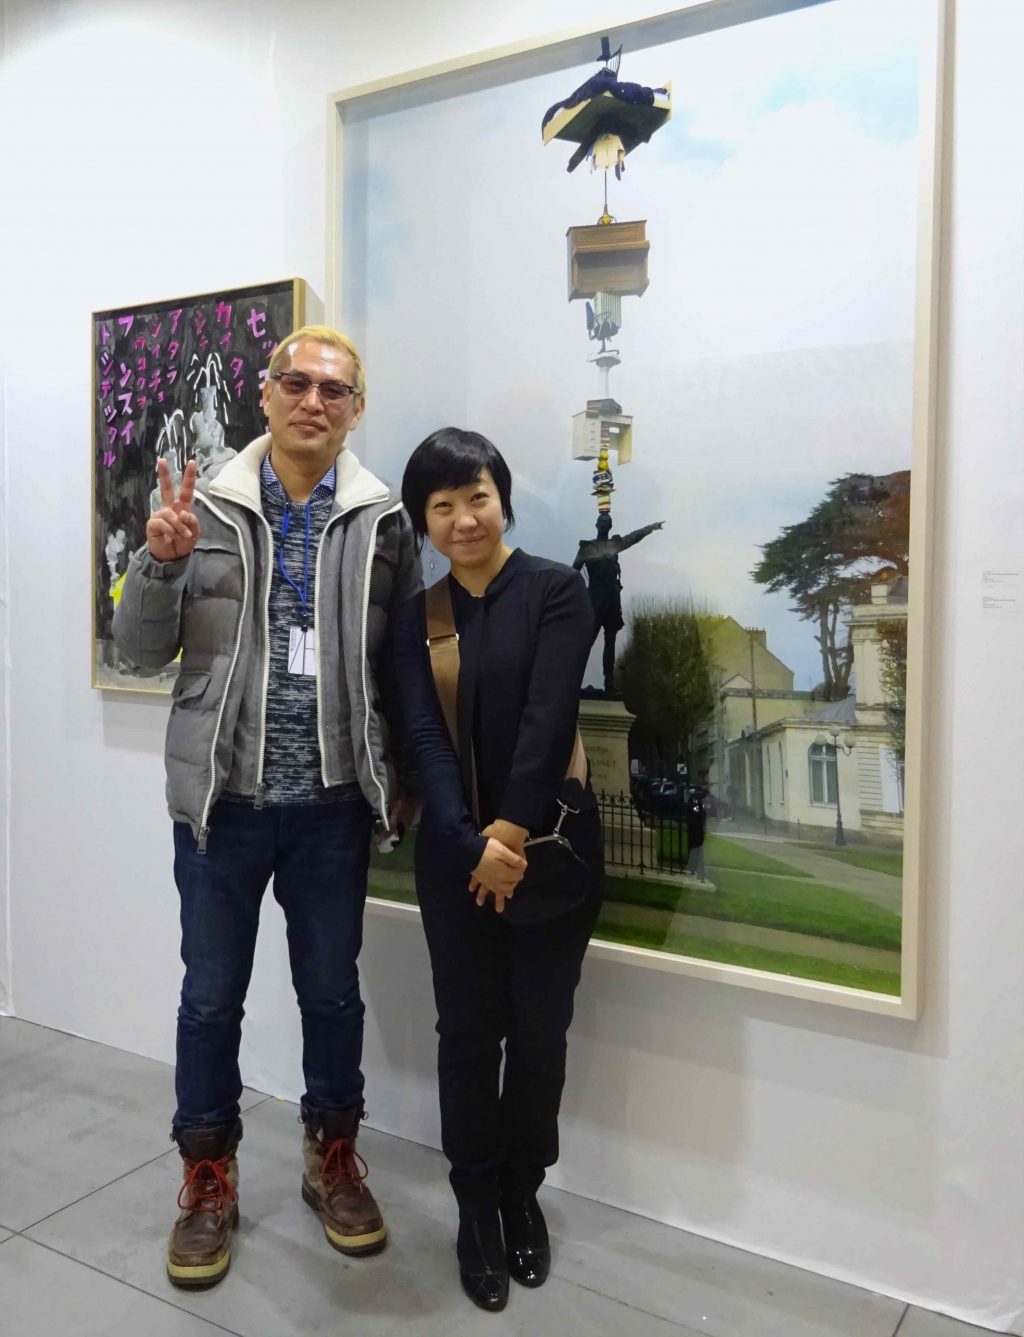 URANO Gallery owner URANO Mutsumi 浦野むつみ celebrating together with her artist NISHI Tatsu 西野達, as he just received the Minister of Education and Culture Award for Fine Arts 芸術選奨文部科学大臣賞受賞